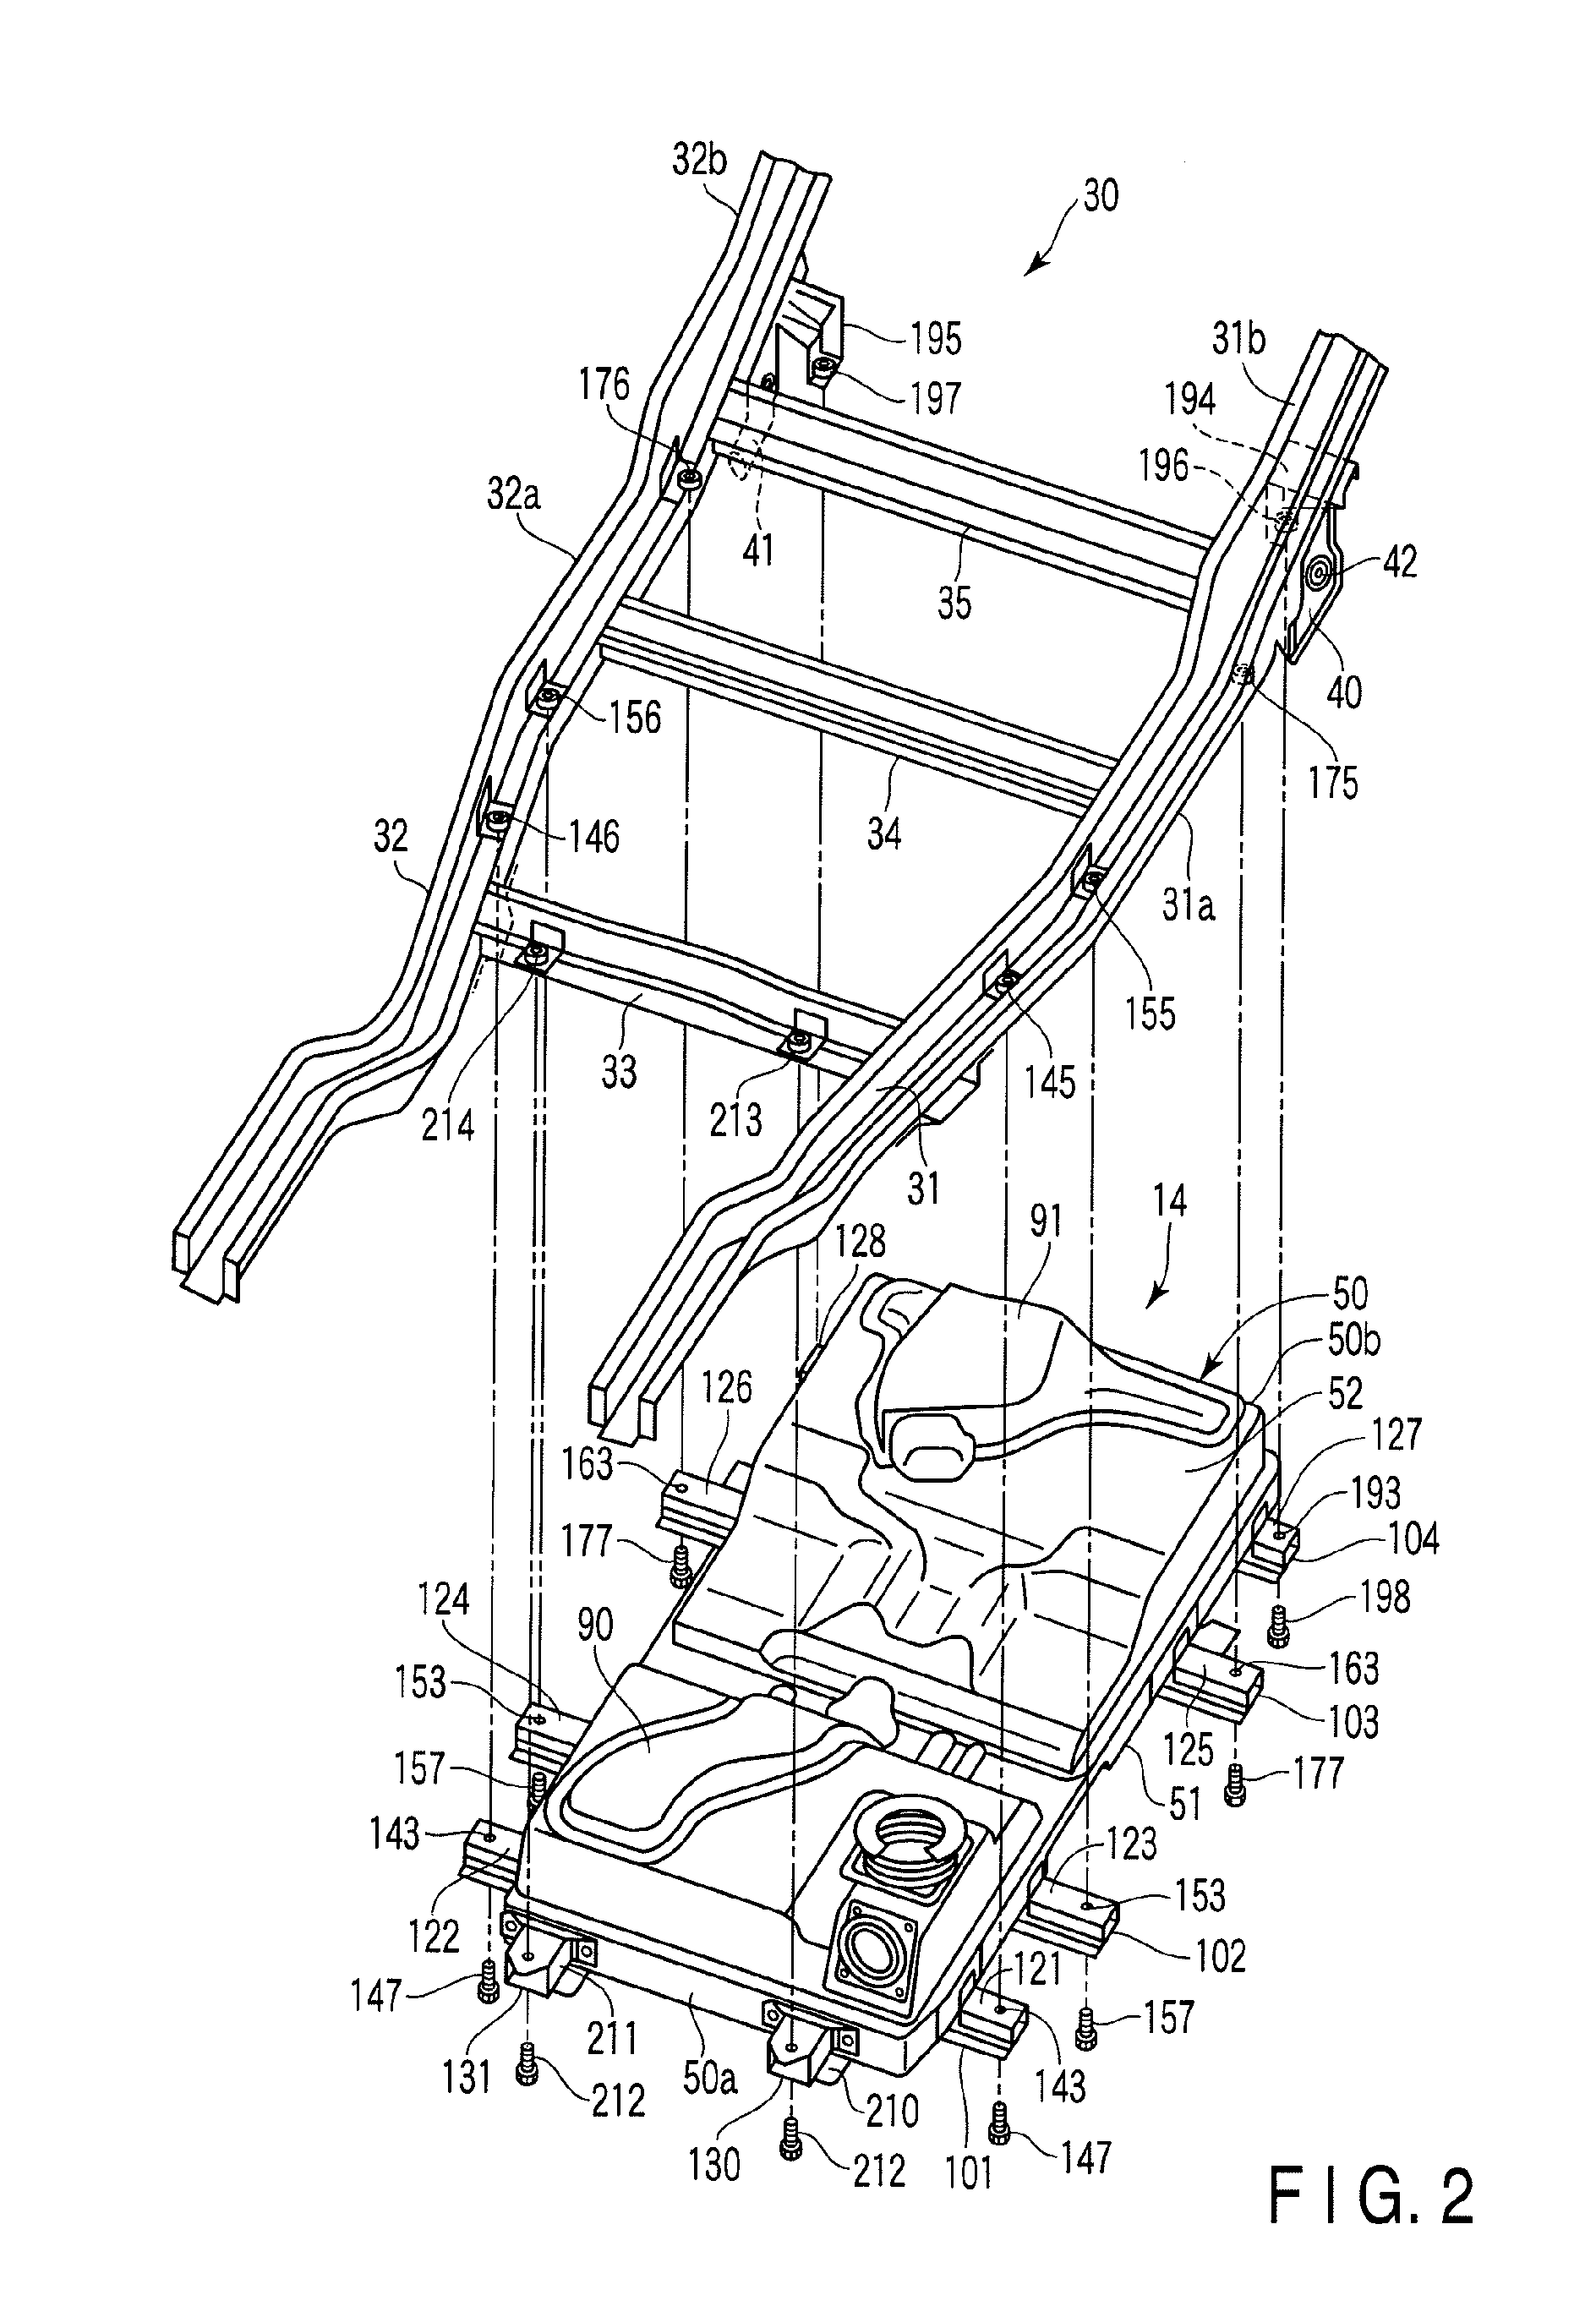 Battery case for electric vehicle